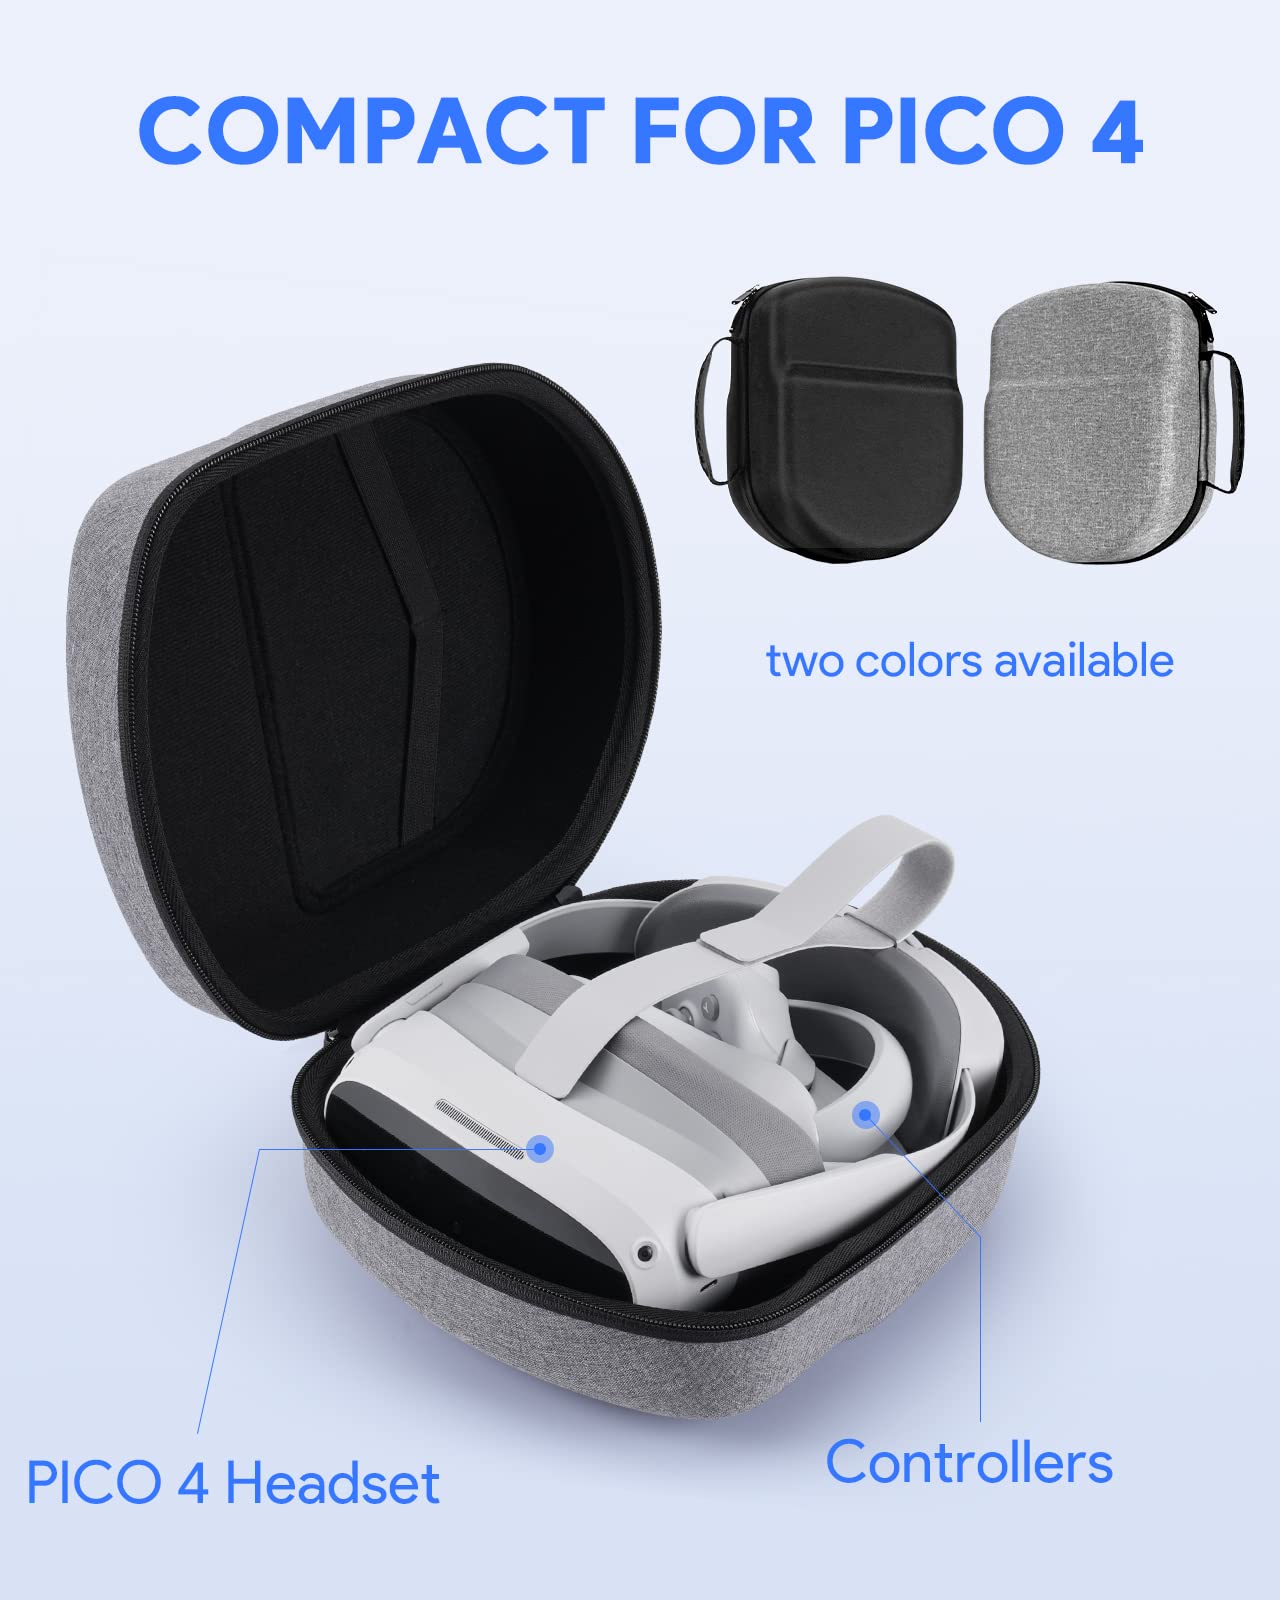 Yinke Case for Meta Quest 3/Oculus Quest 2/Pico 4, VR Headset Case Compatible with Elite Strap and More Accessories, Hard Carrying Travel Case All-in-One Storage (Grey) - ARVRedtech.com | AR & VR Education Technology